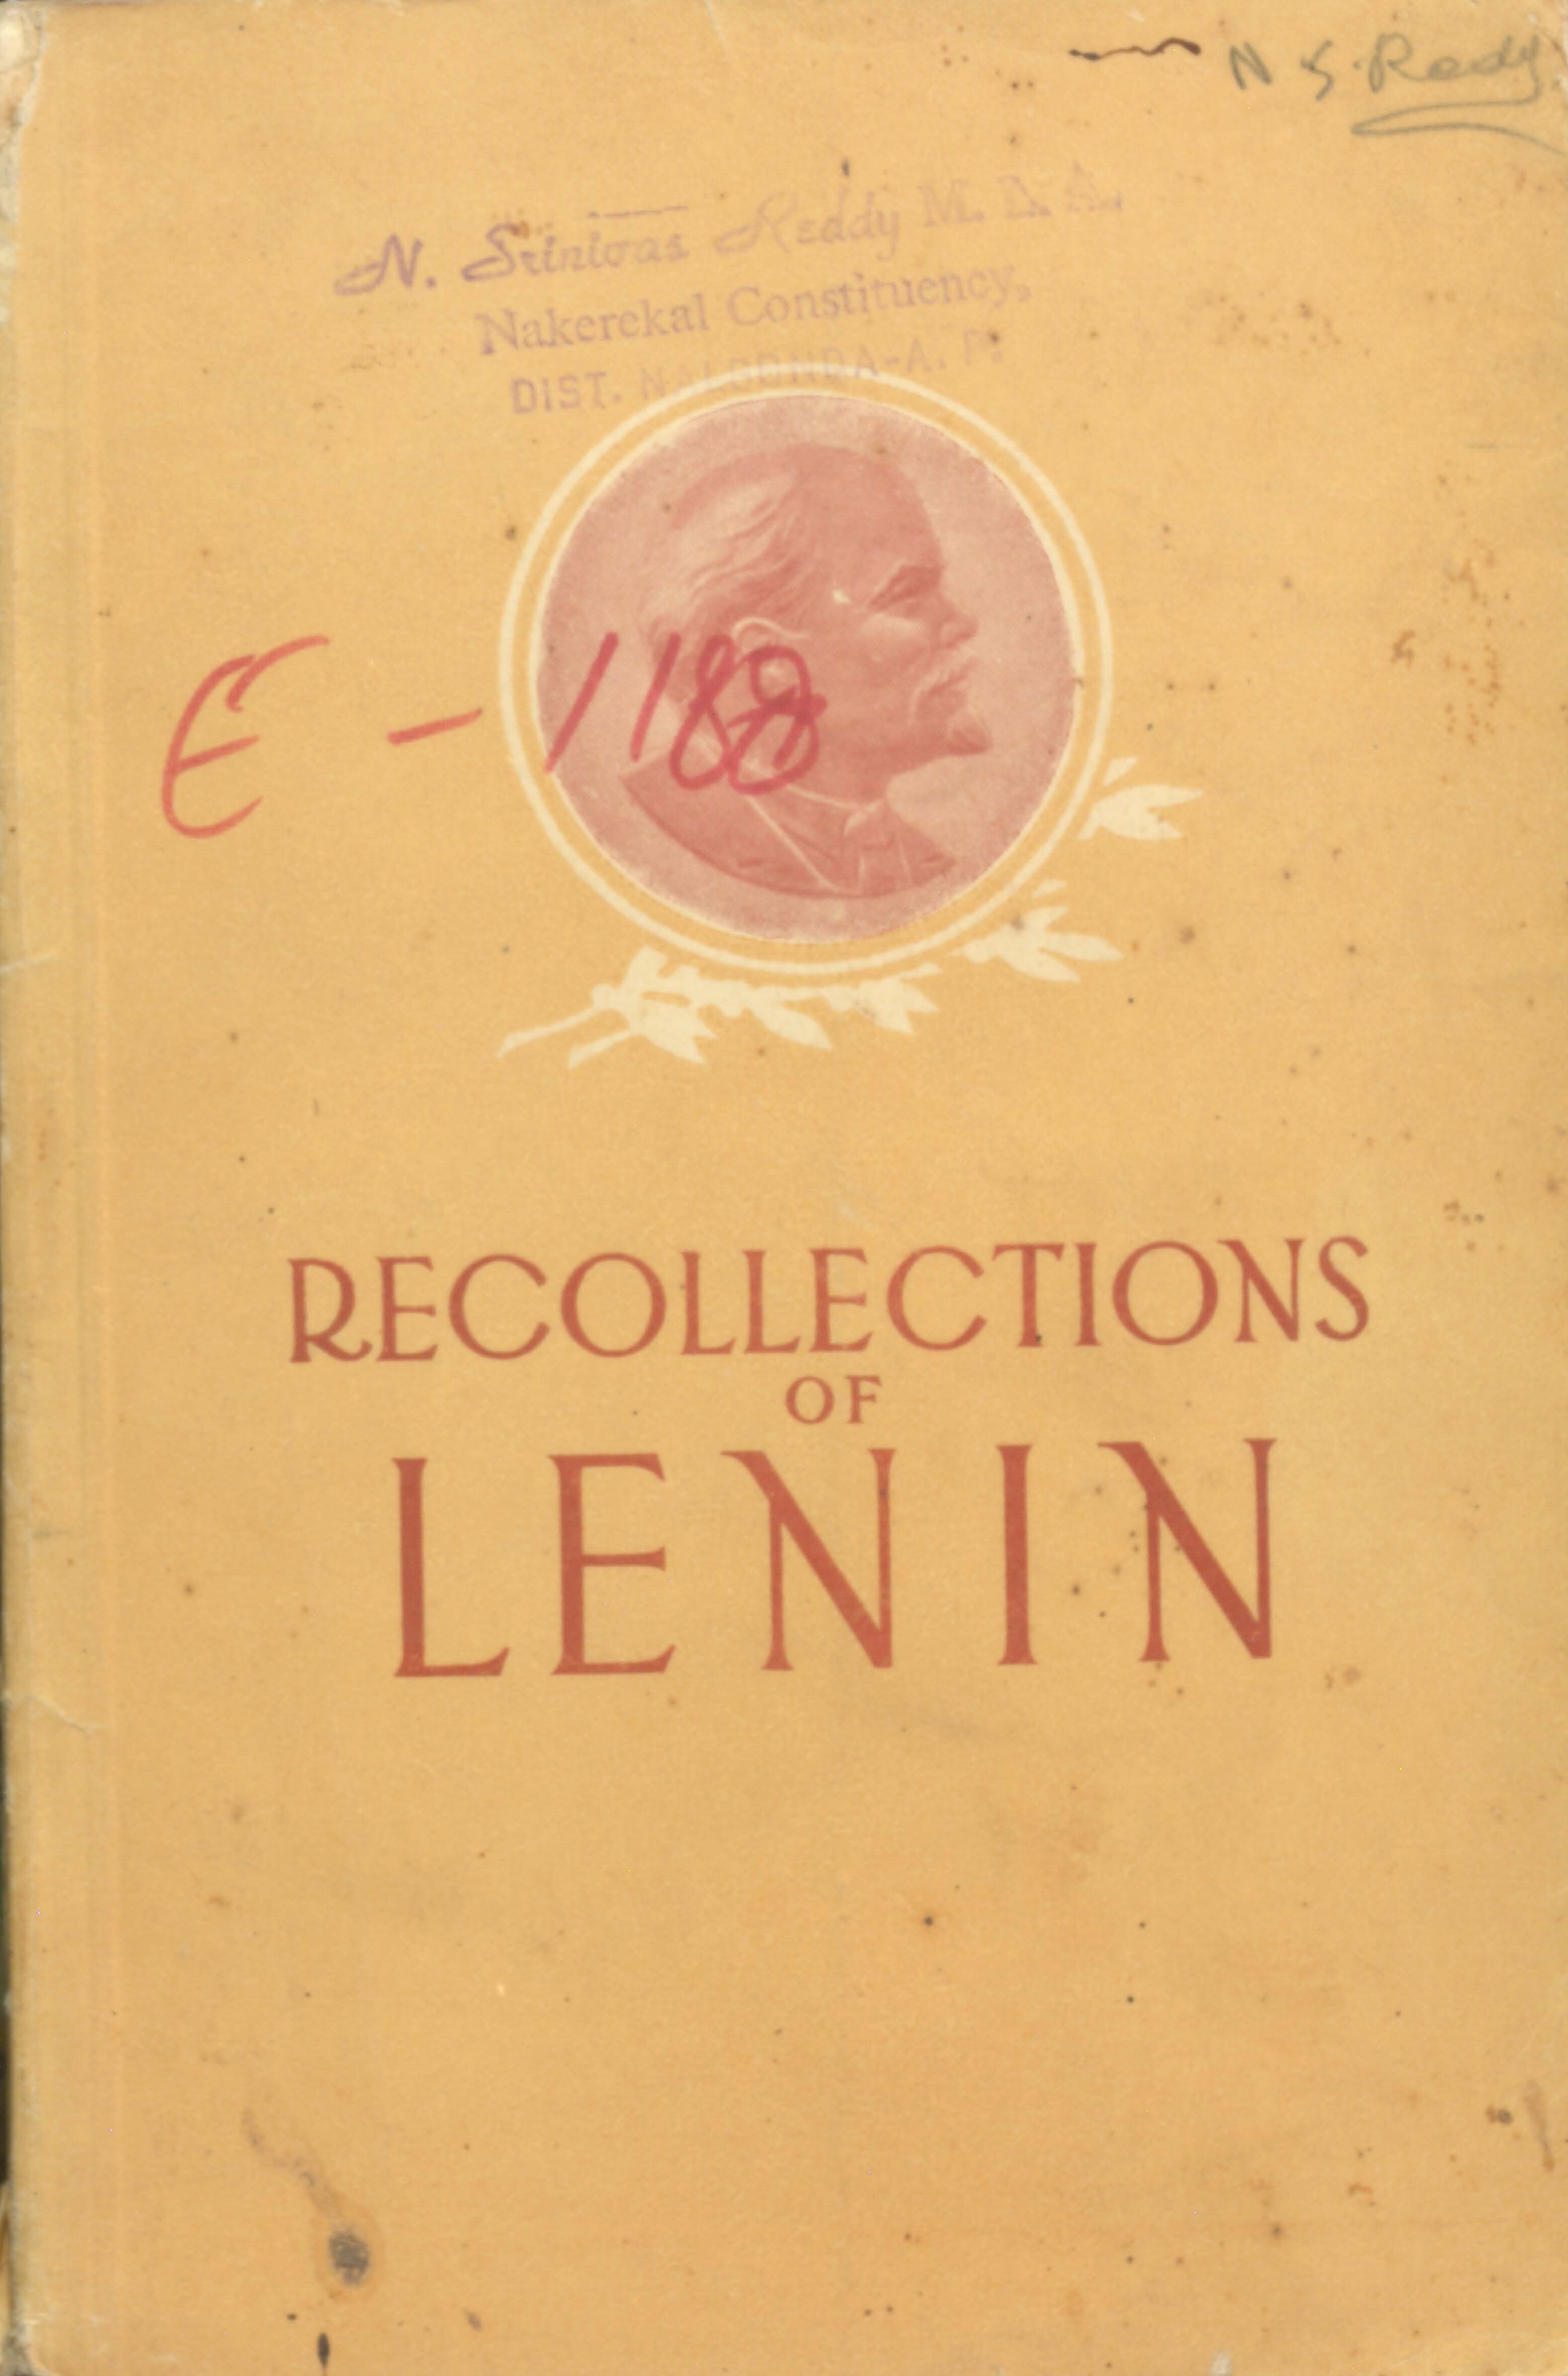 Recoliections of lenin